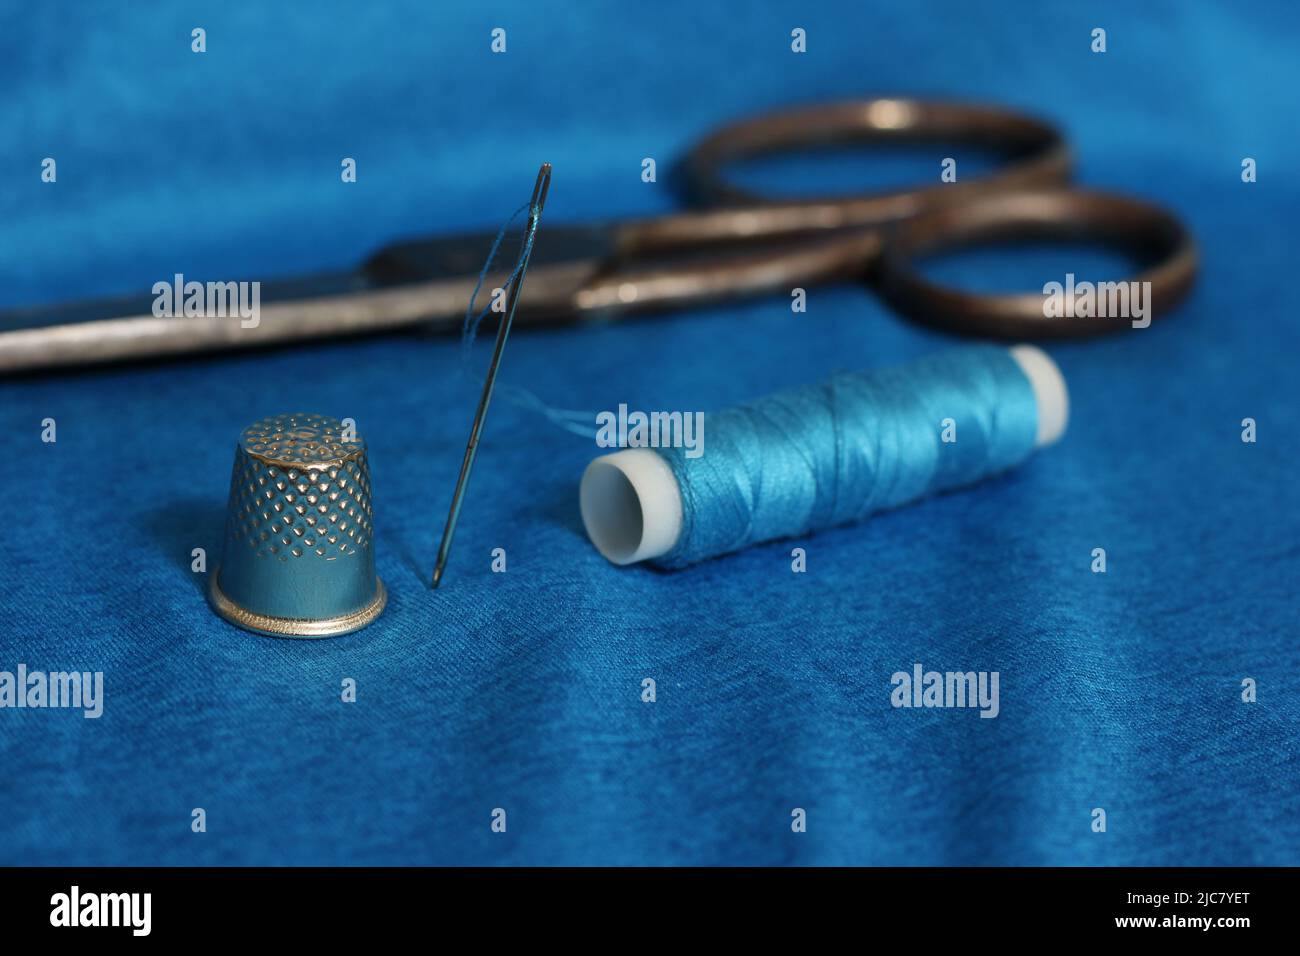 Spool of Blue Thread, Thimble and Needle on Blue Fabric Stock Photo